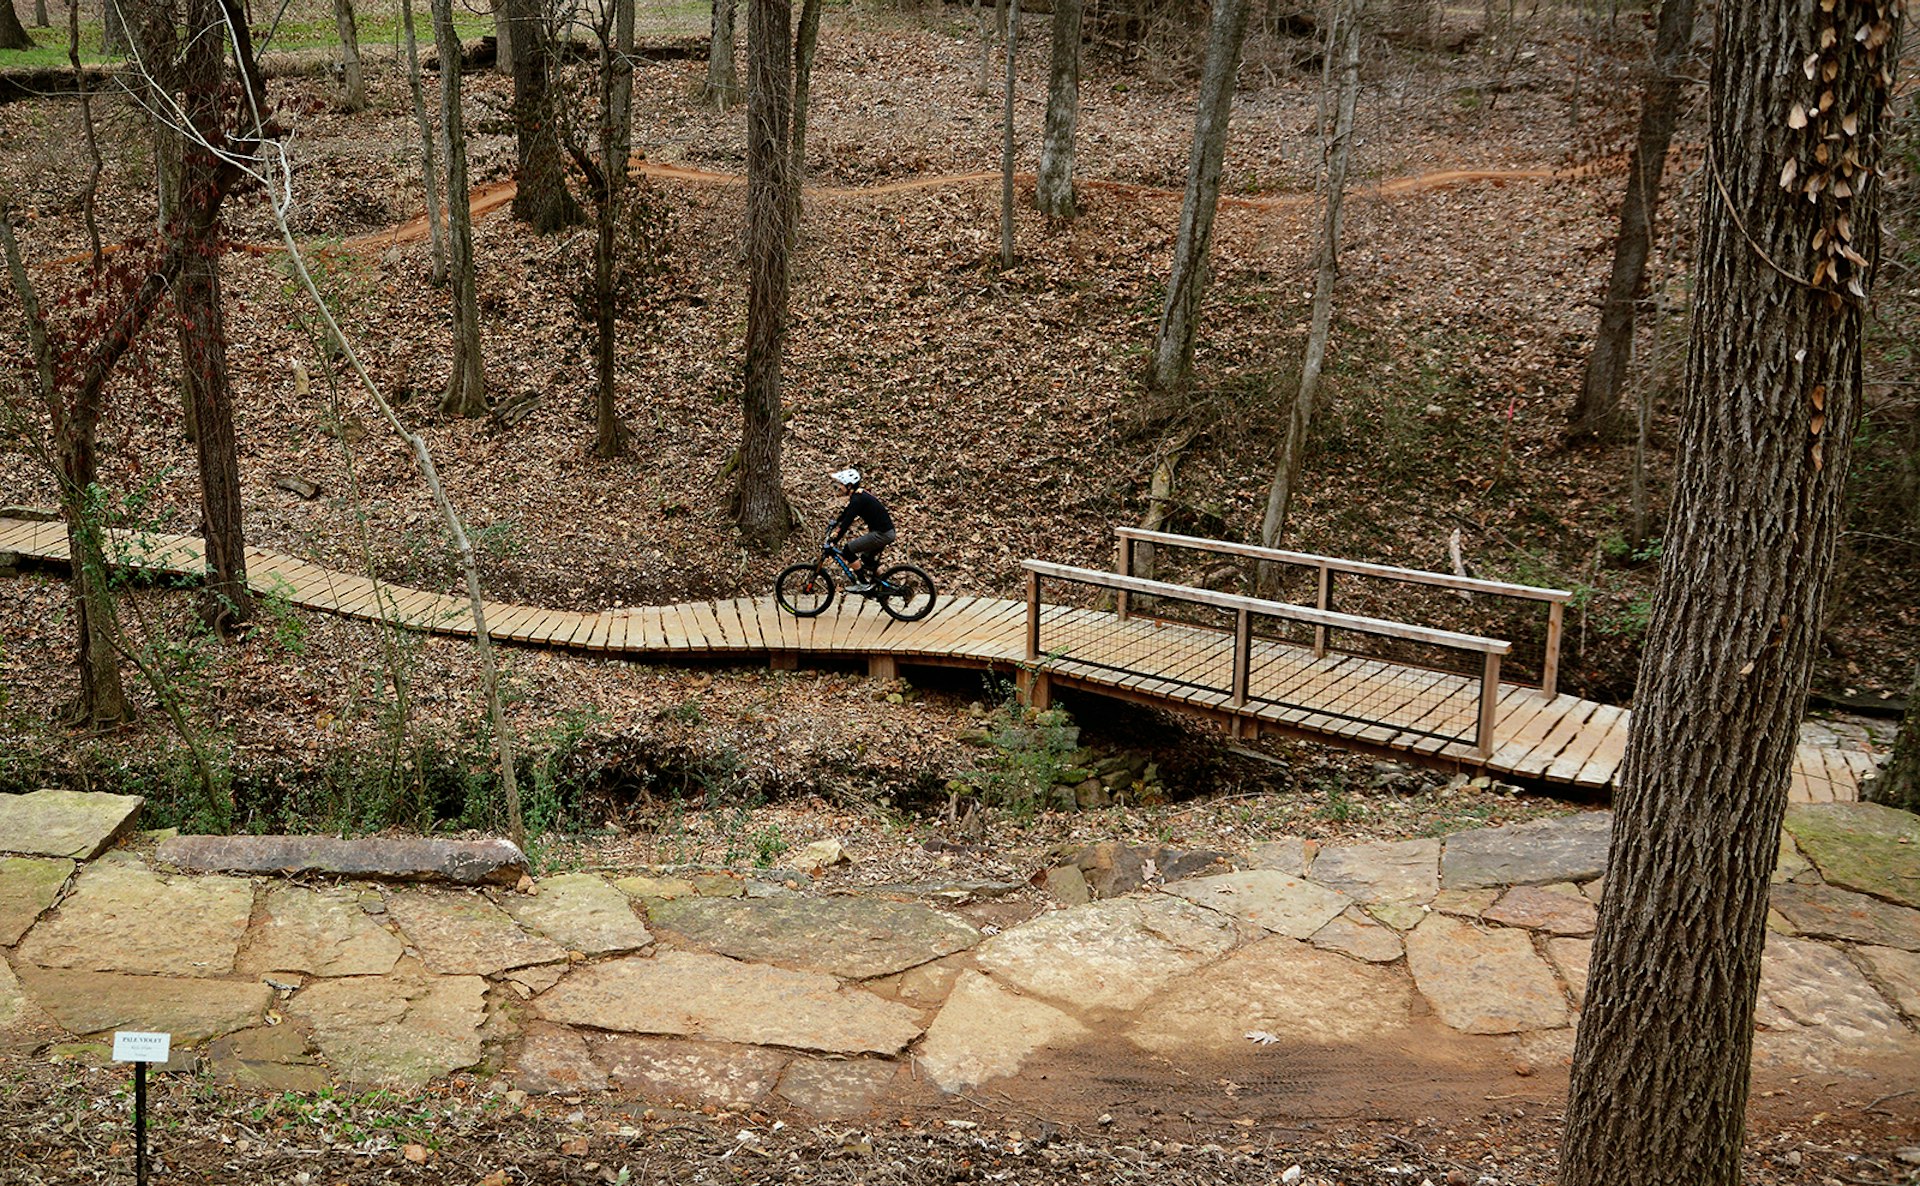 A mountain bike rider in a white helmet pedals over a wooden plank bridge through a wooded forest in Arkansas